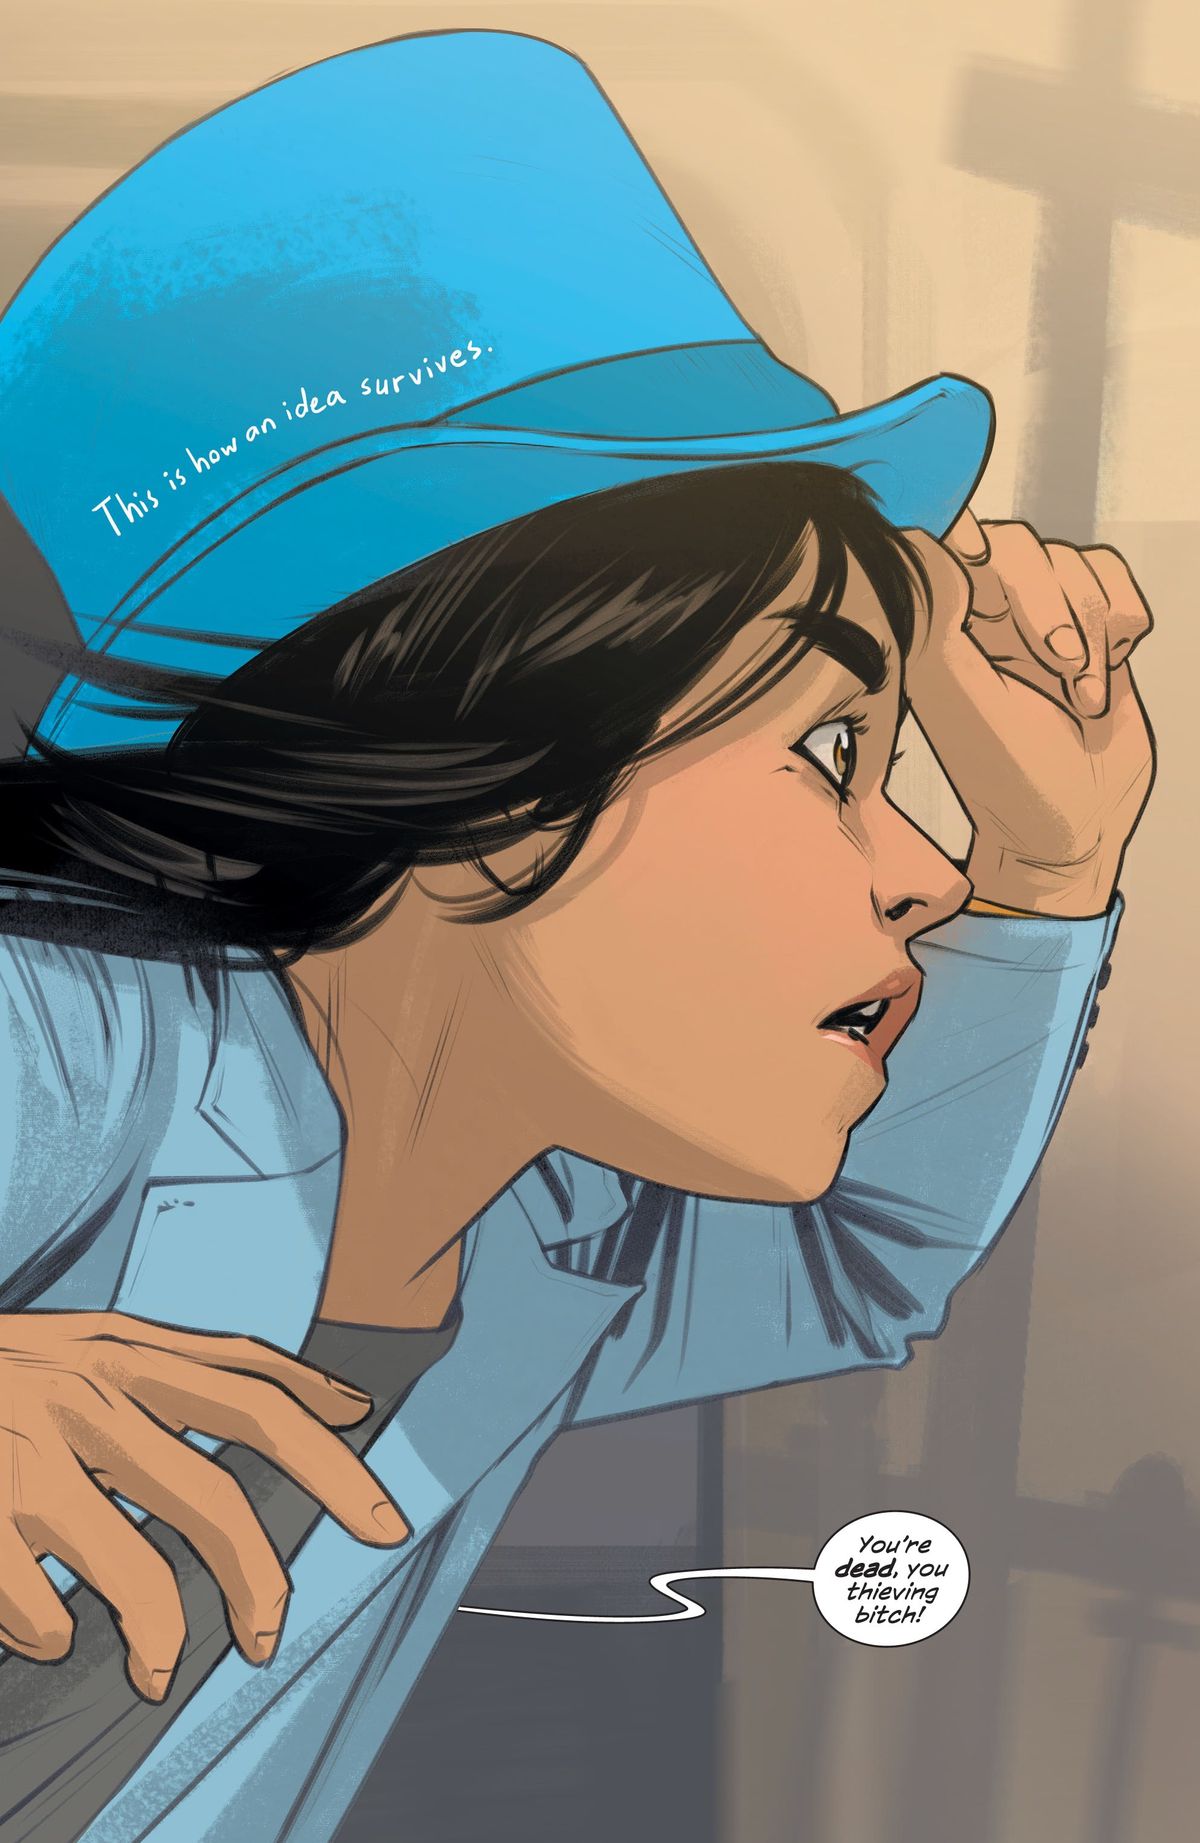 “This is how an idea survives,” reads narration text, as Hazel runs from a voice accusing her of thievery, clutching her blue top hat to her head in Saga #55. 